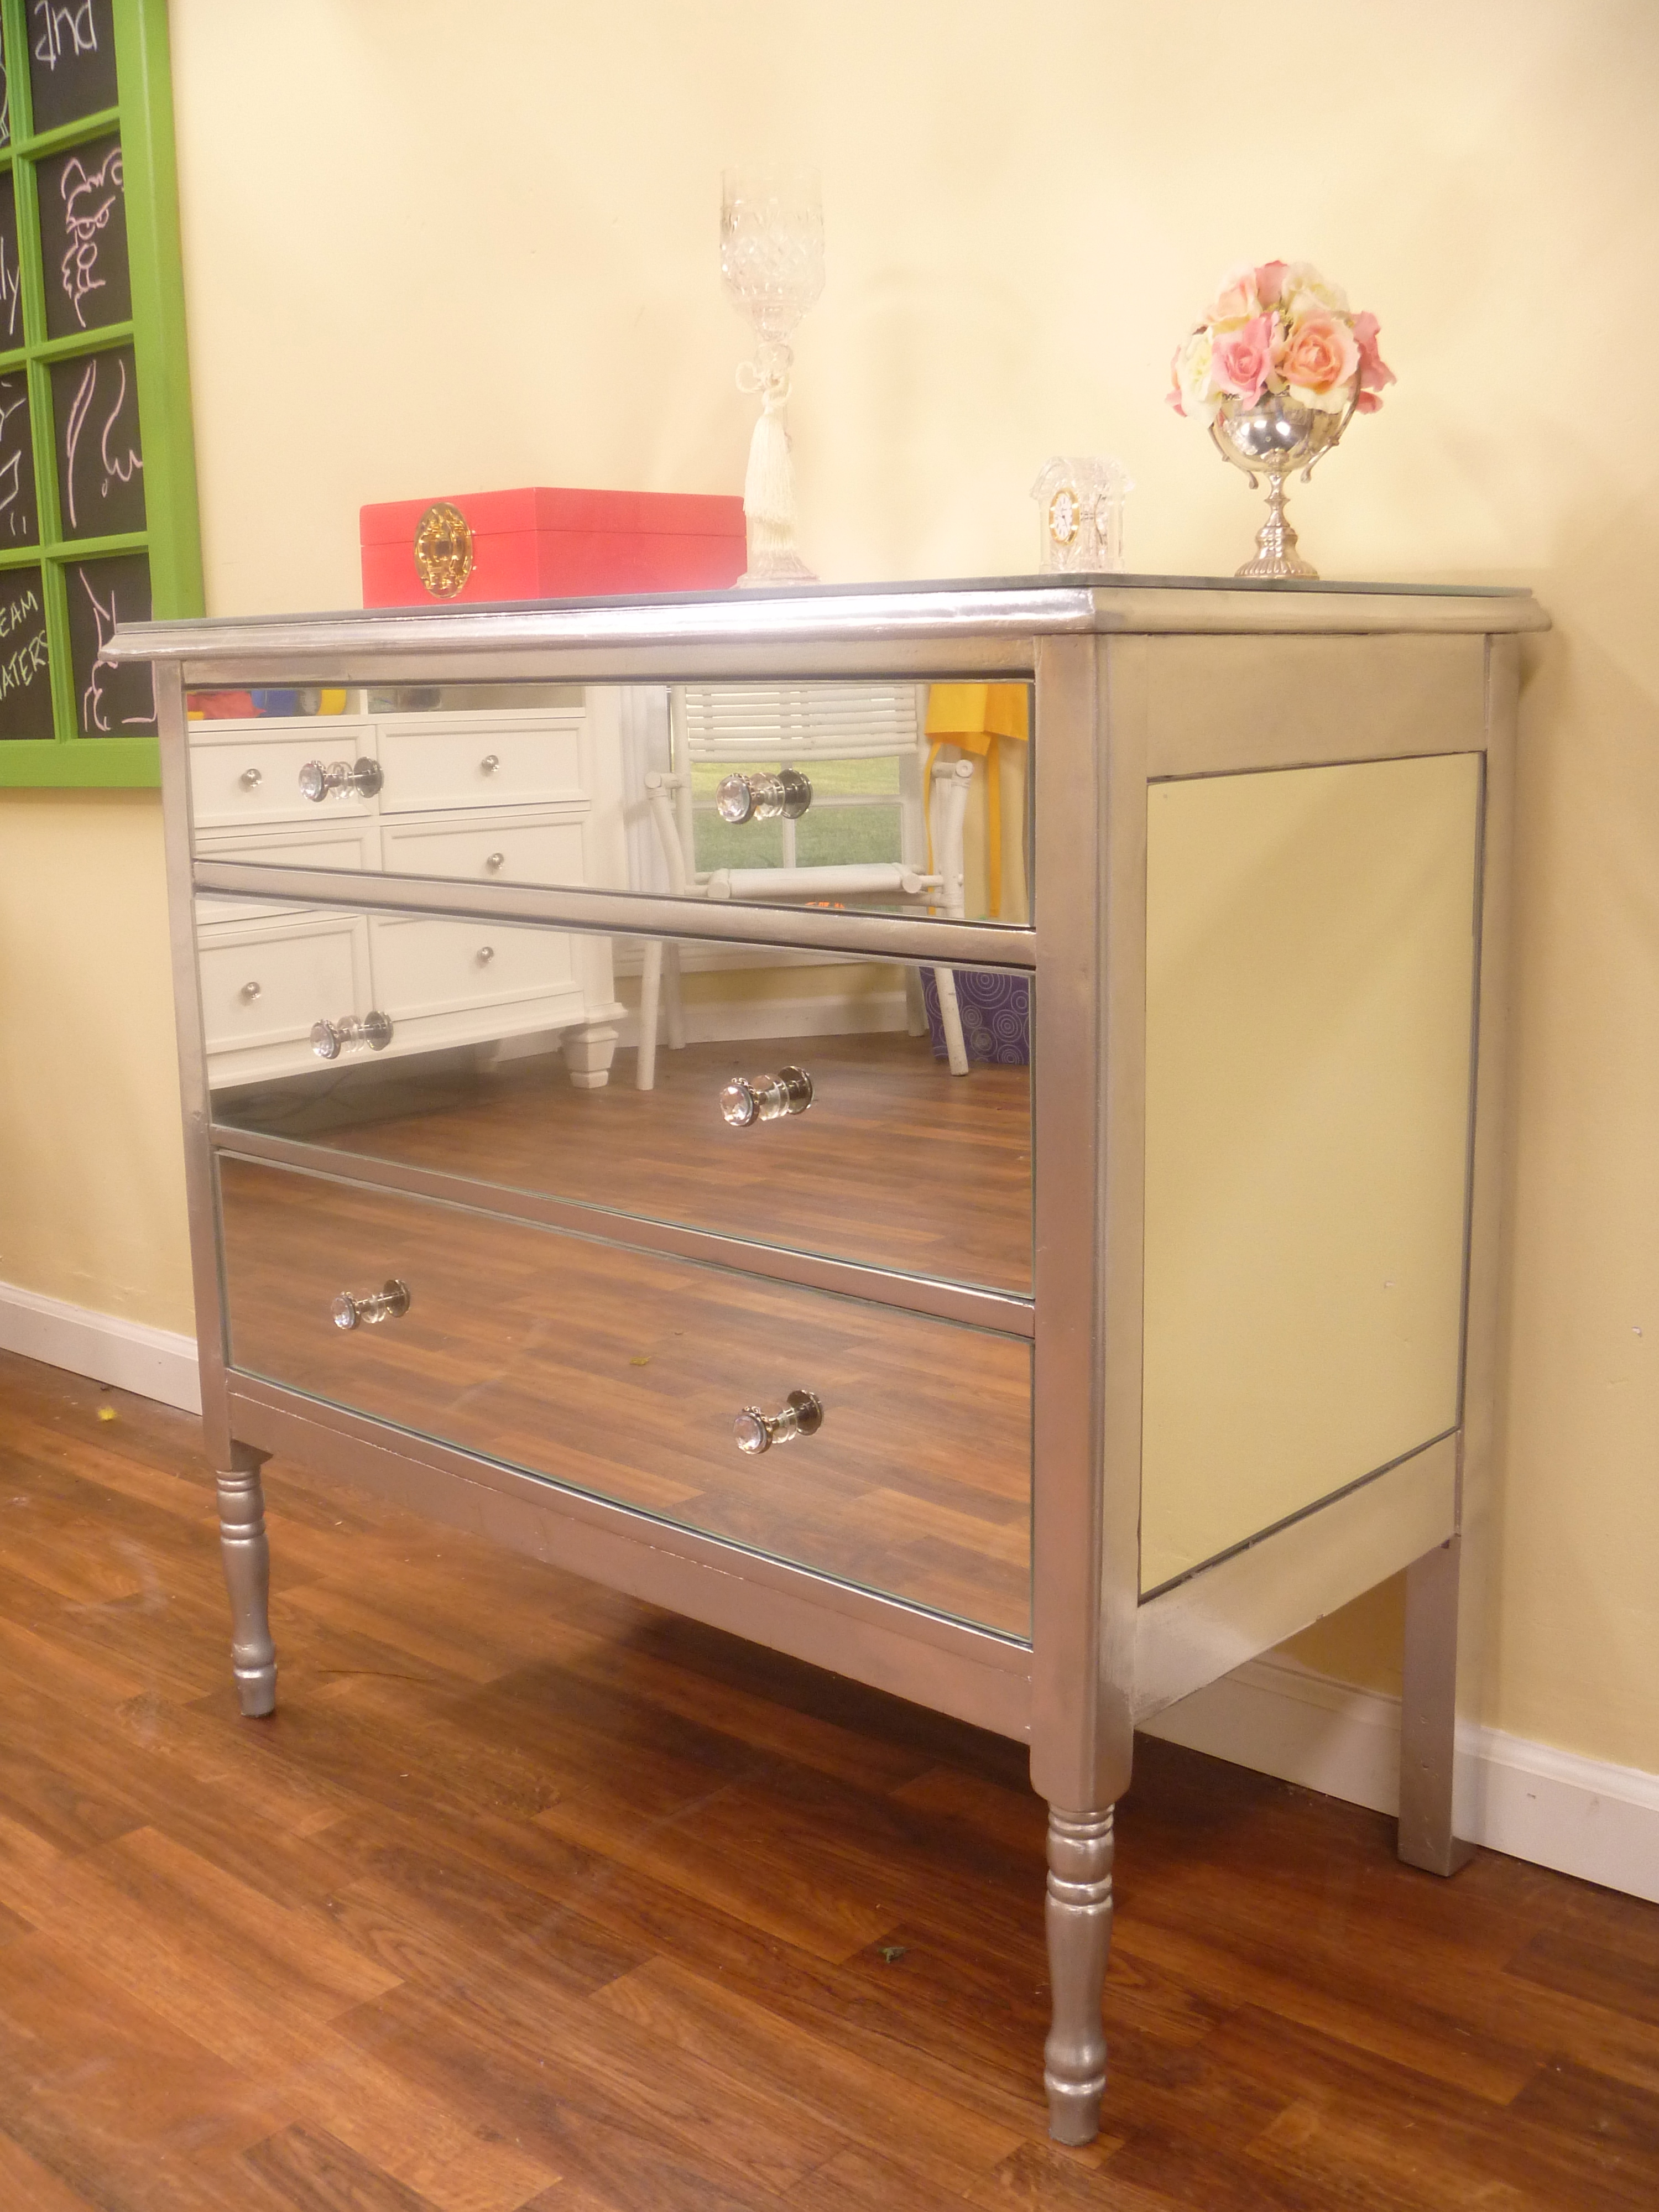 furniture upgrade your home with pretty mirrored dresser table target multi colored chest drawers dressers mirrors gallerie mirror bedside side nightstan silver accent blue